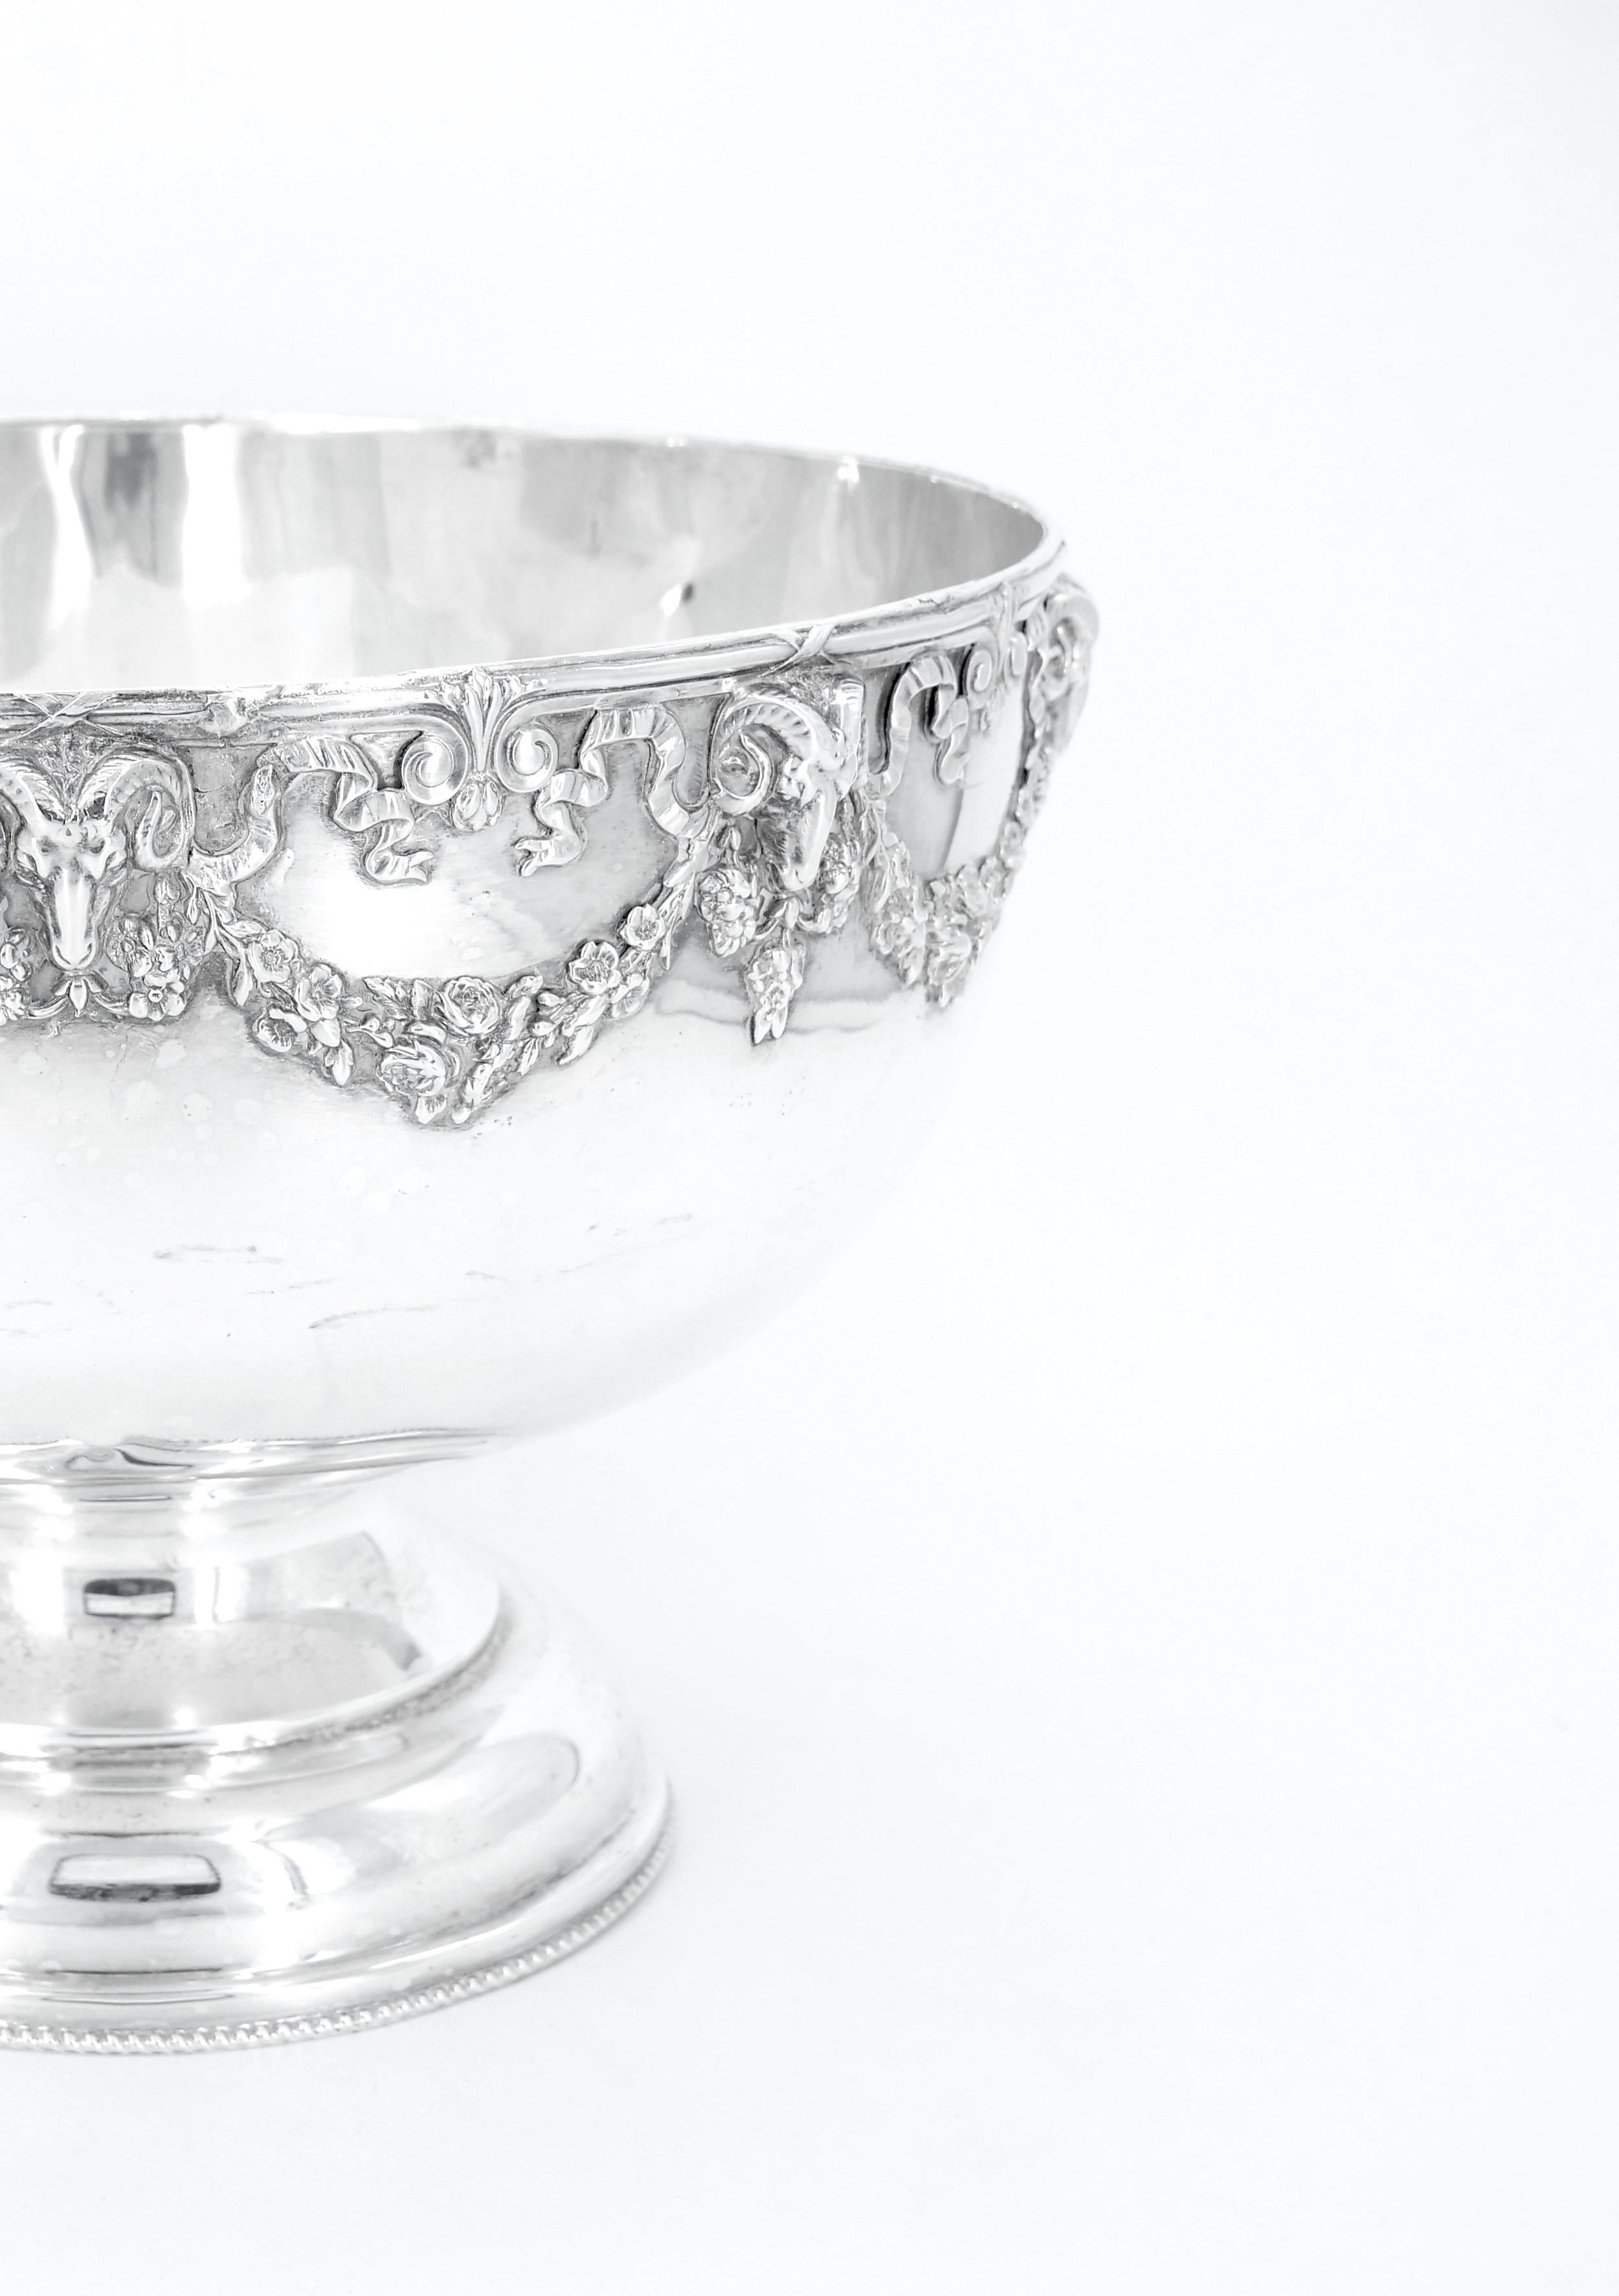 Old EnglishSilver Plate Centerpiece Bowl / Punch Bowl  For Sale 4